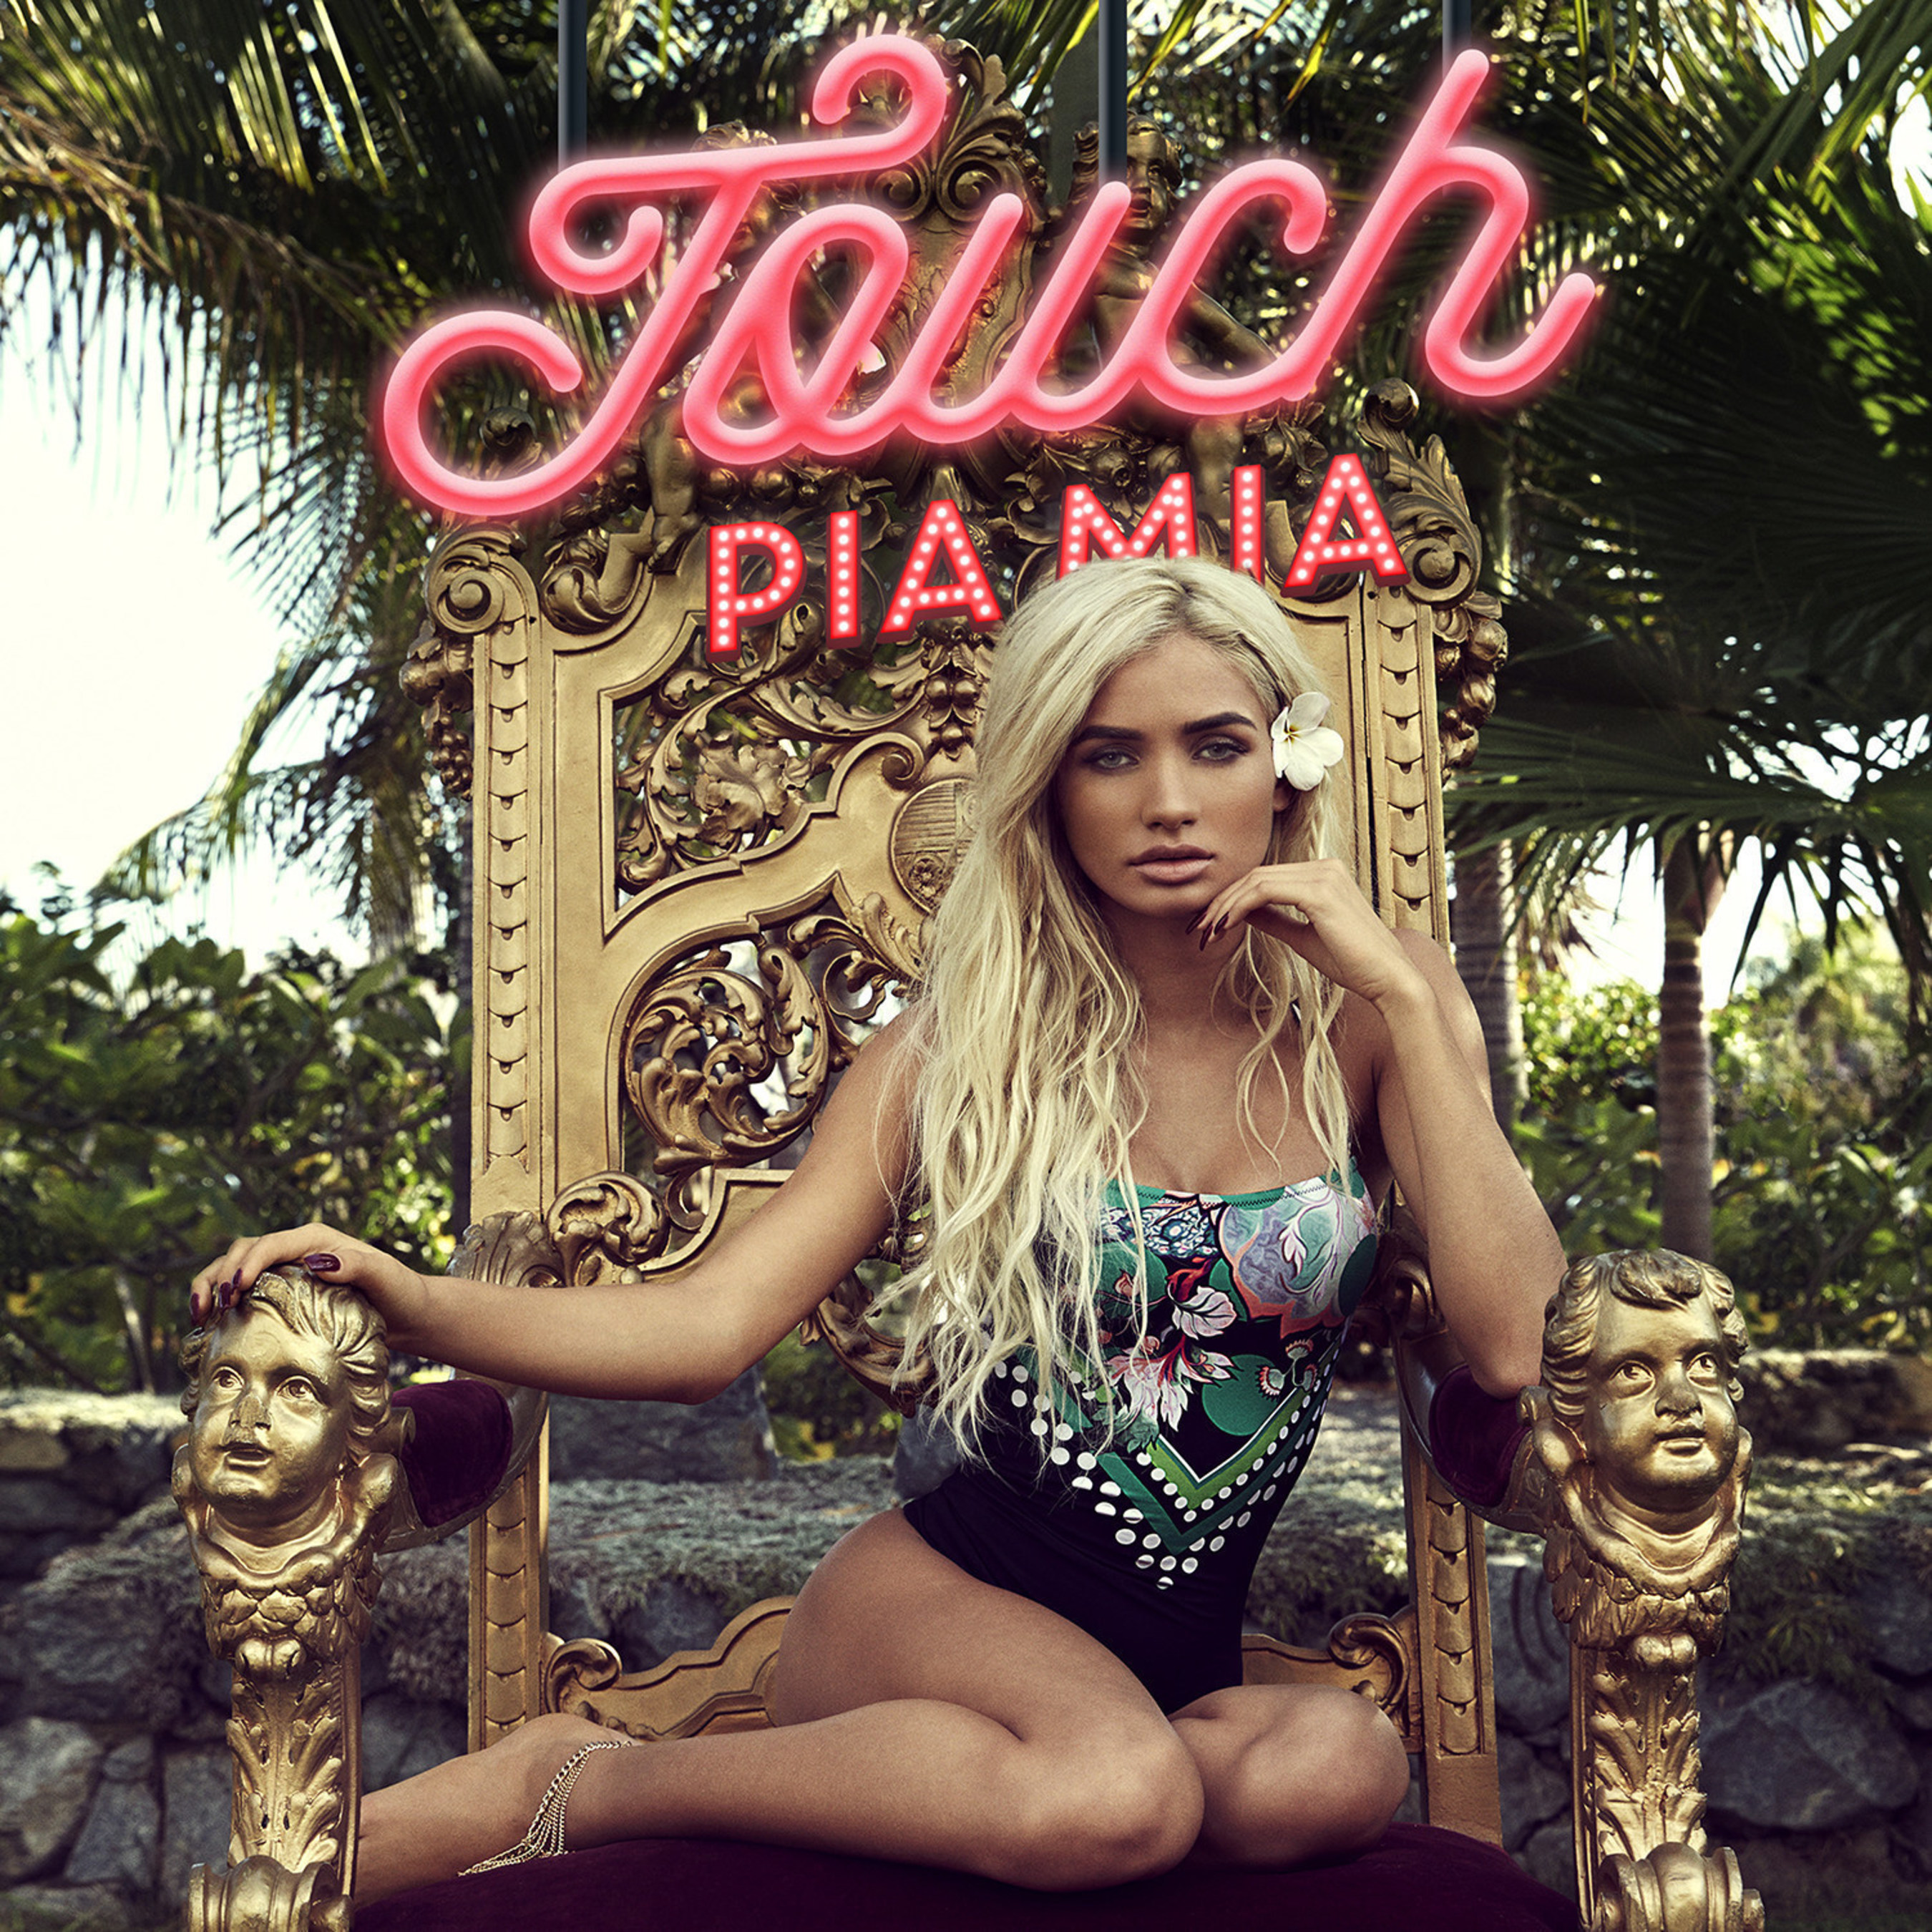 Singer/Songwriter Pia Mia Releases New Single "Touch"